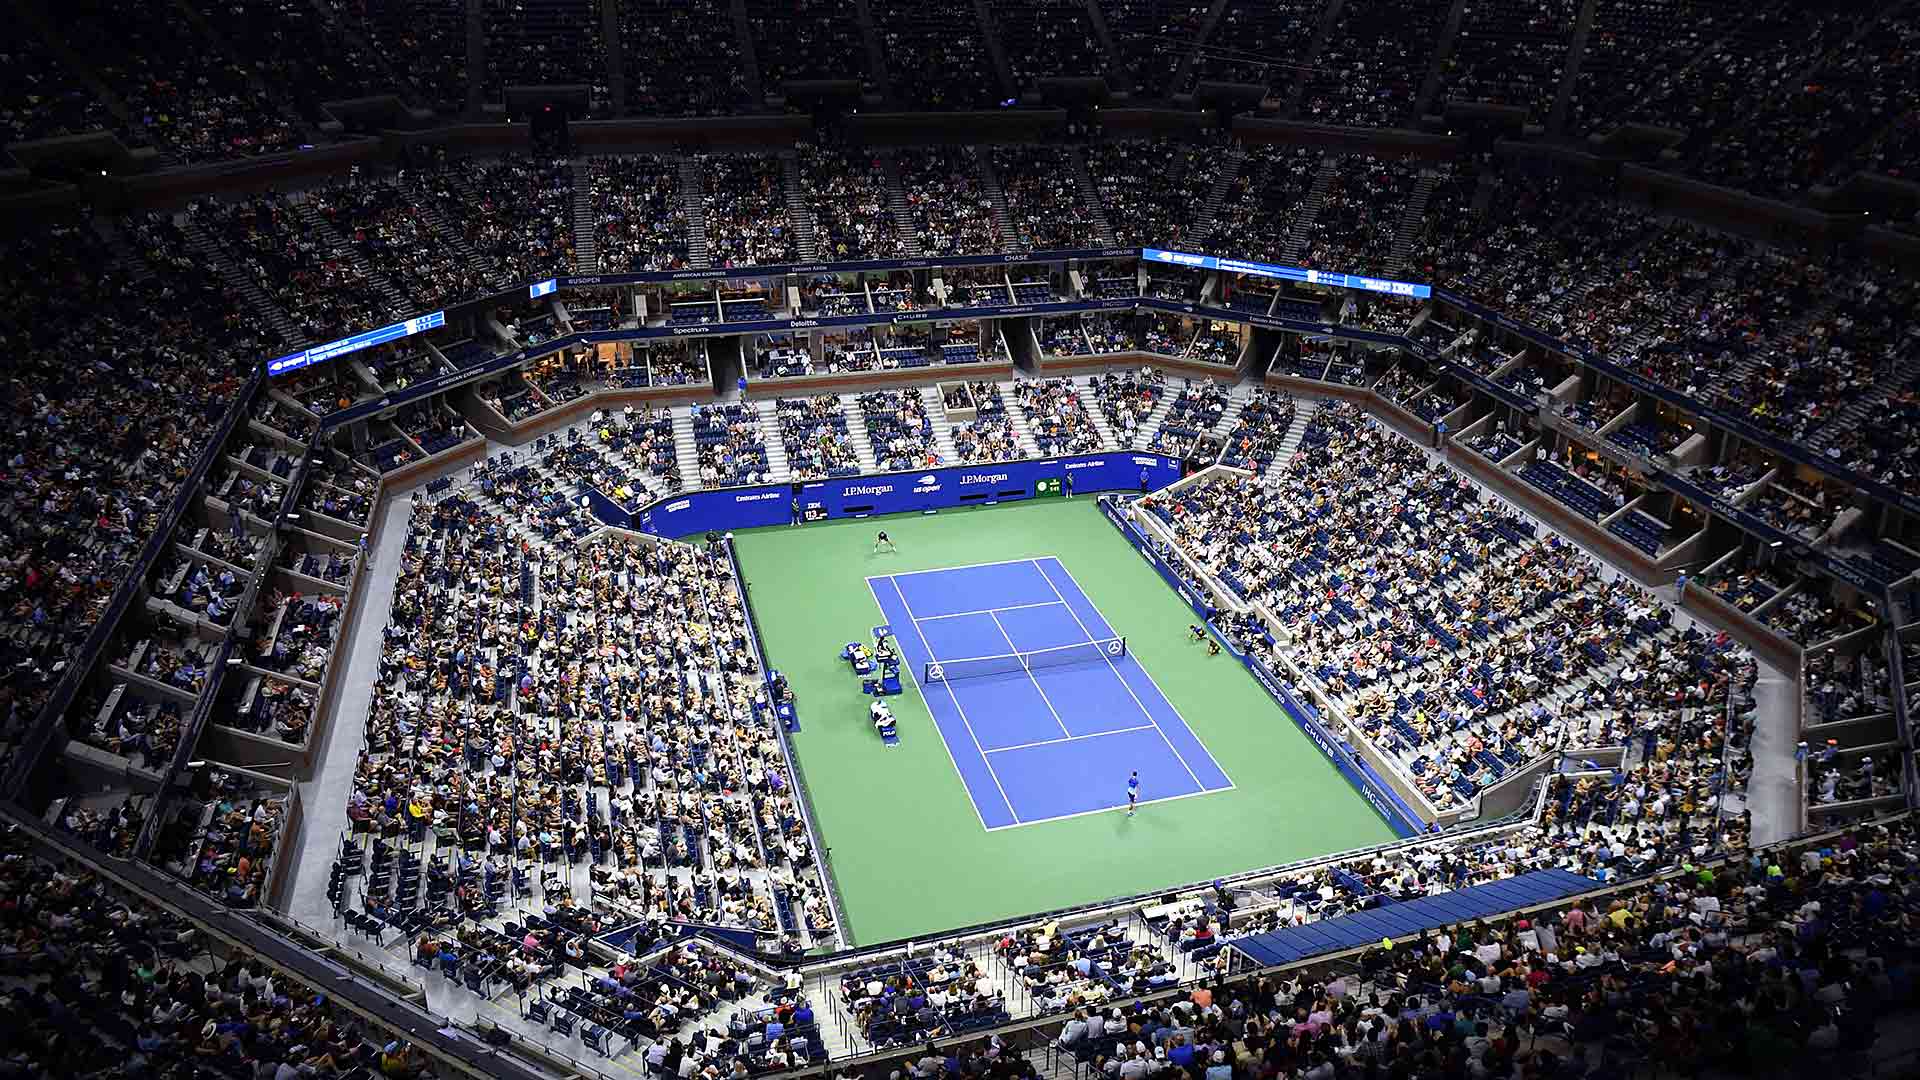 us-tennis-open-schedule-for-today-on-sale-save-58-jlcatj-gob-mx